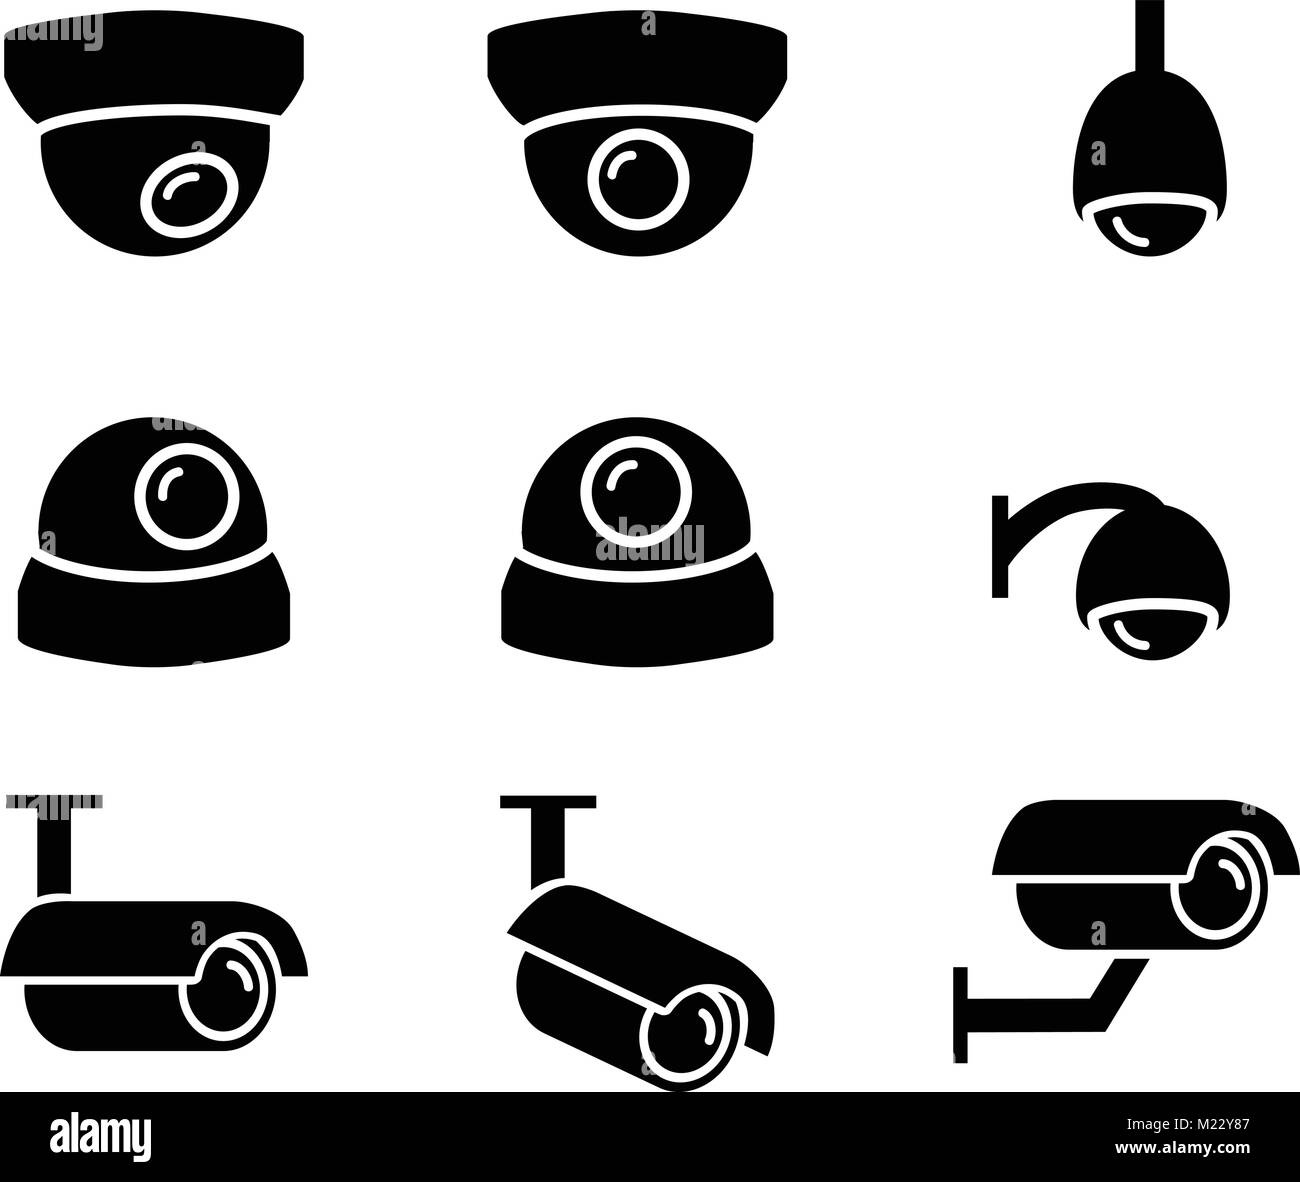 CCTV camera icons and symbol in silhouette, vector art Stock Vector